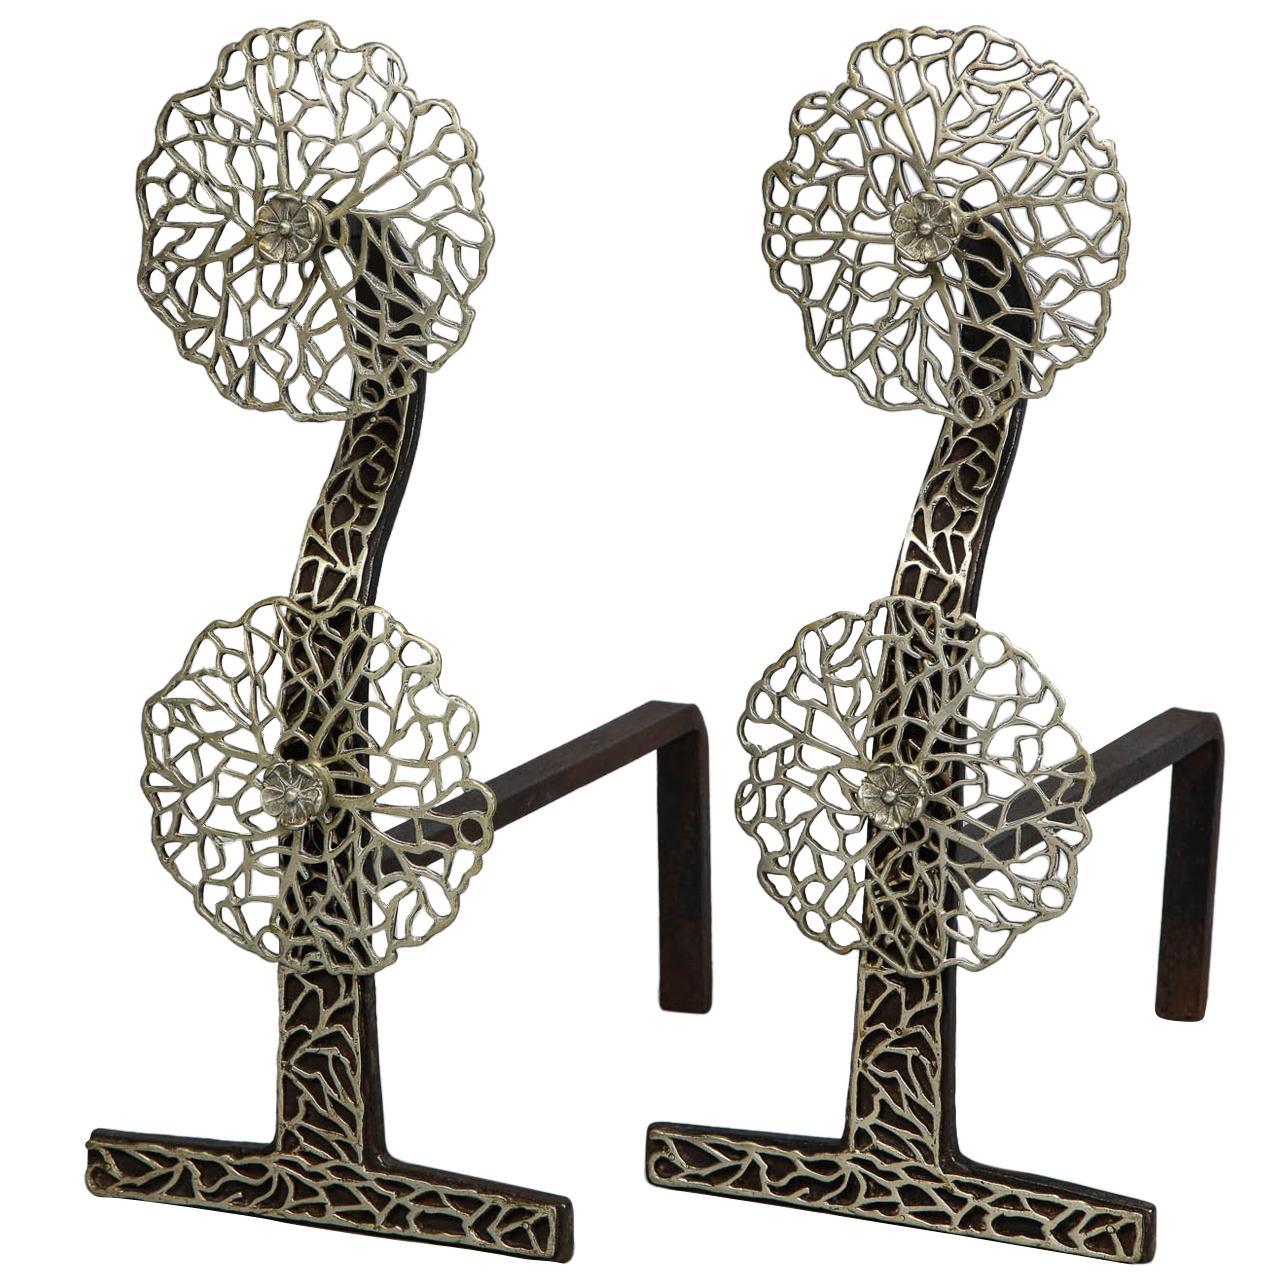 Pair of Arts & Crafts "Cow Parsley" Andirons